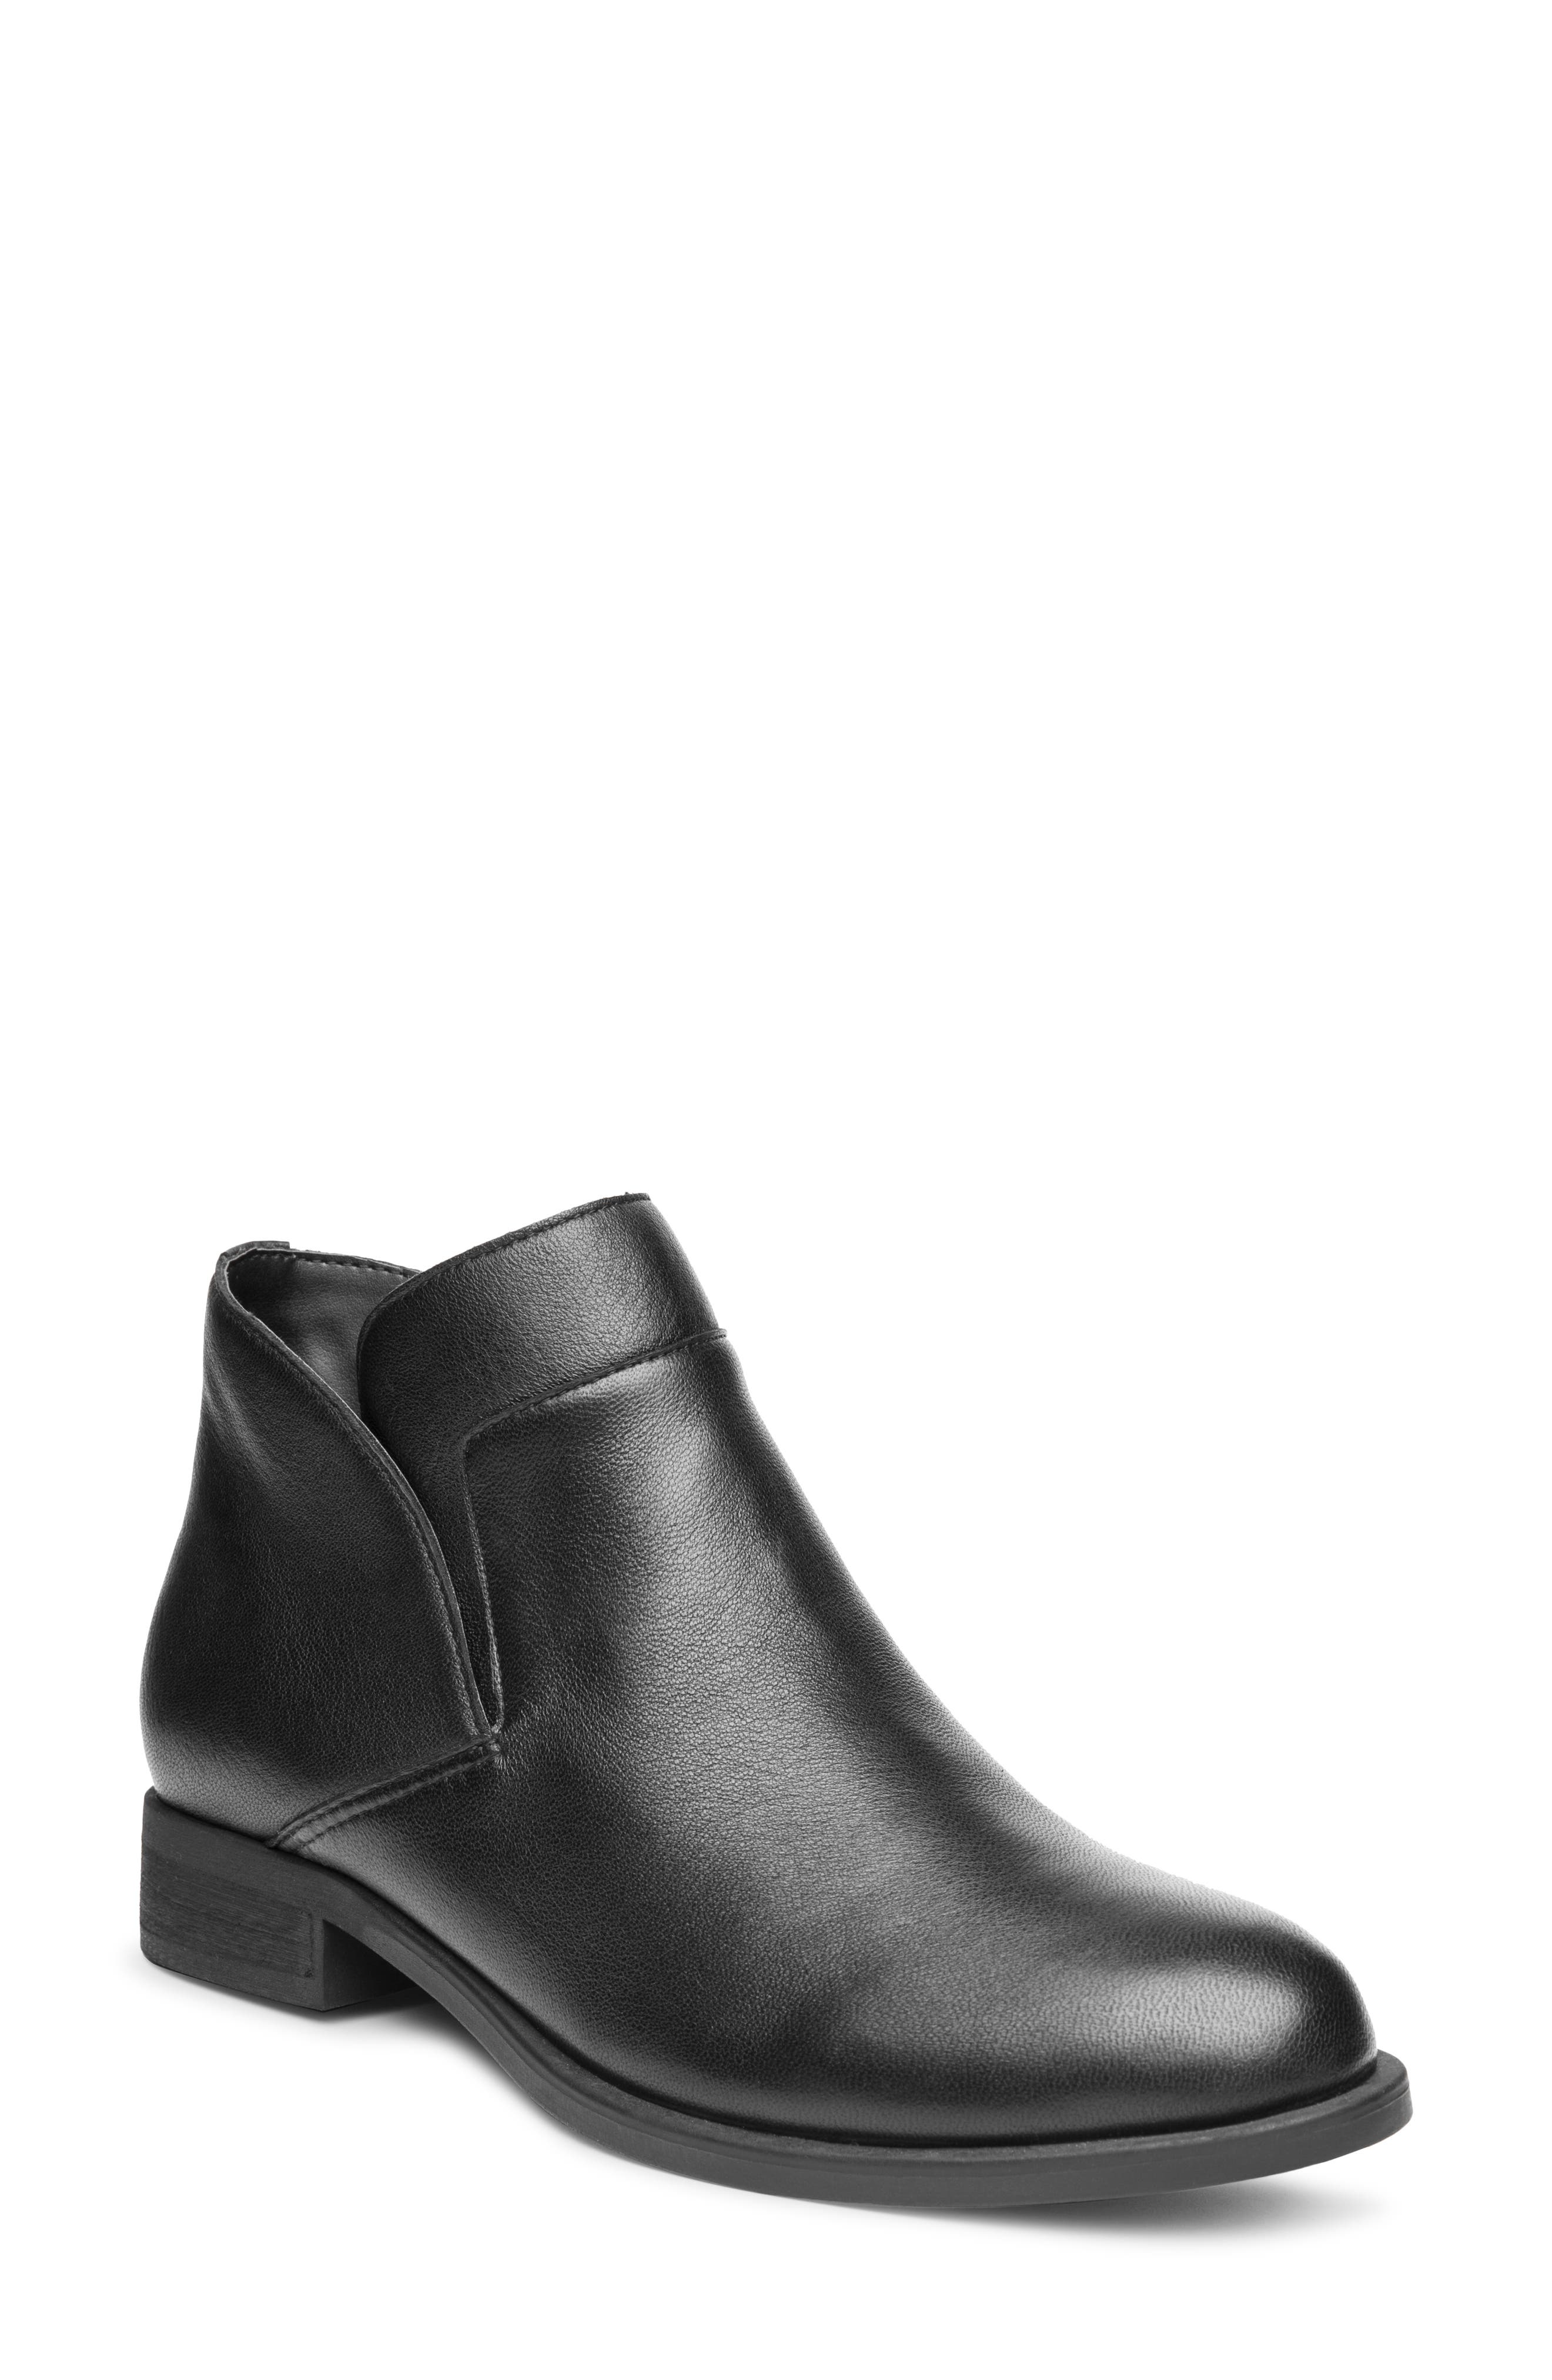 black ankle boots near me